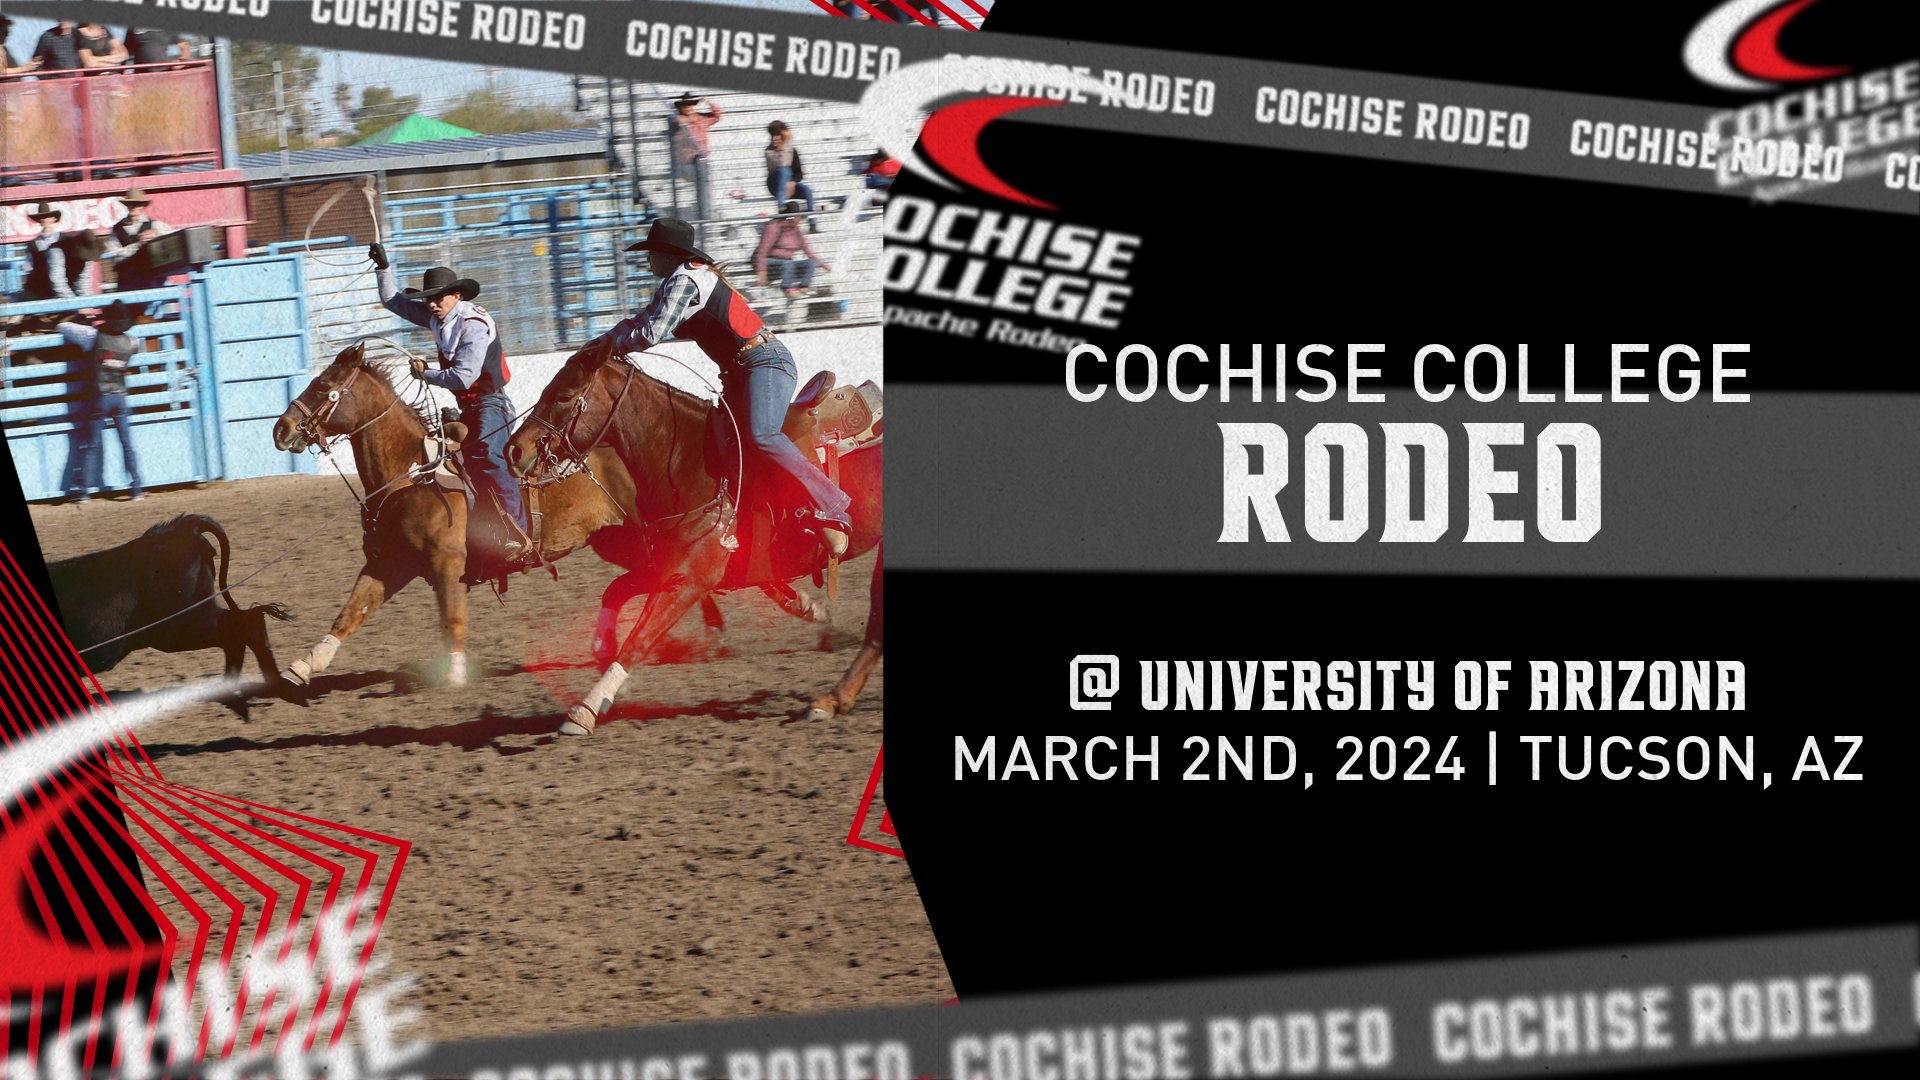 Cochise Rodeo at U of A